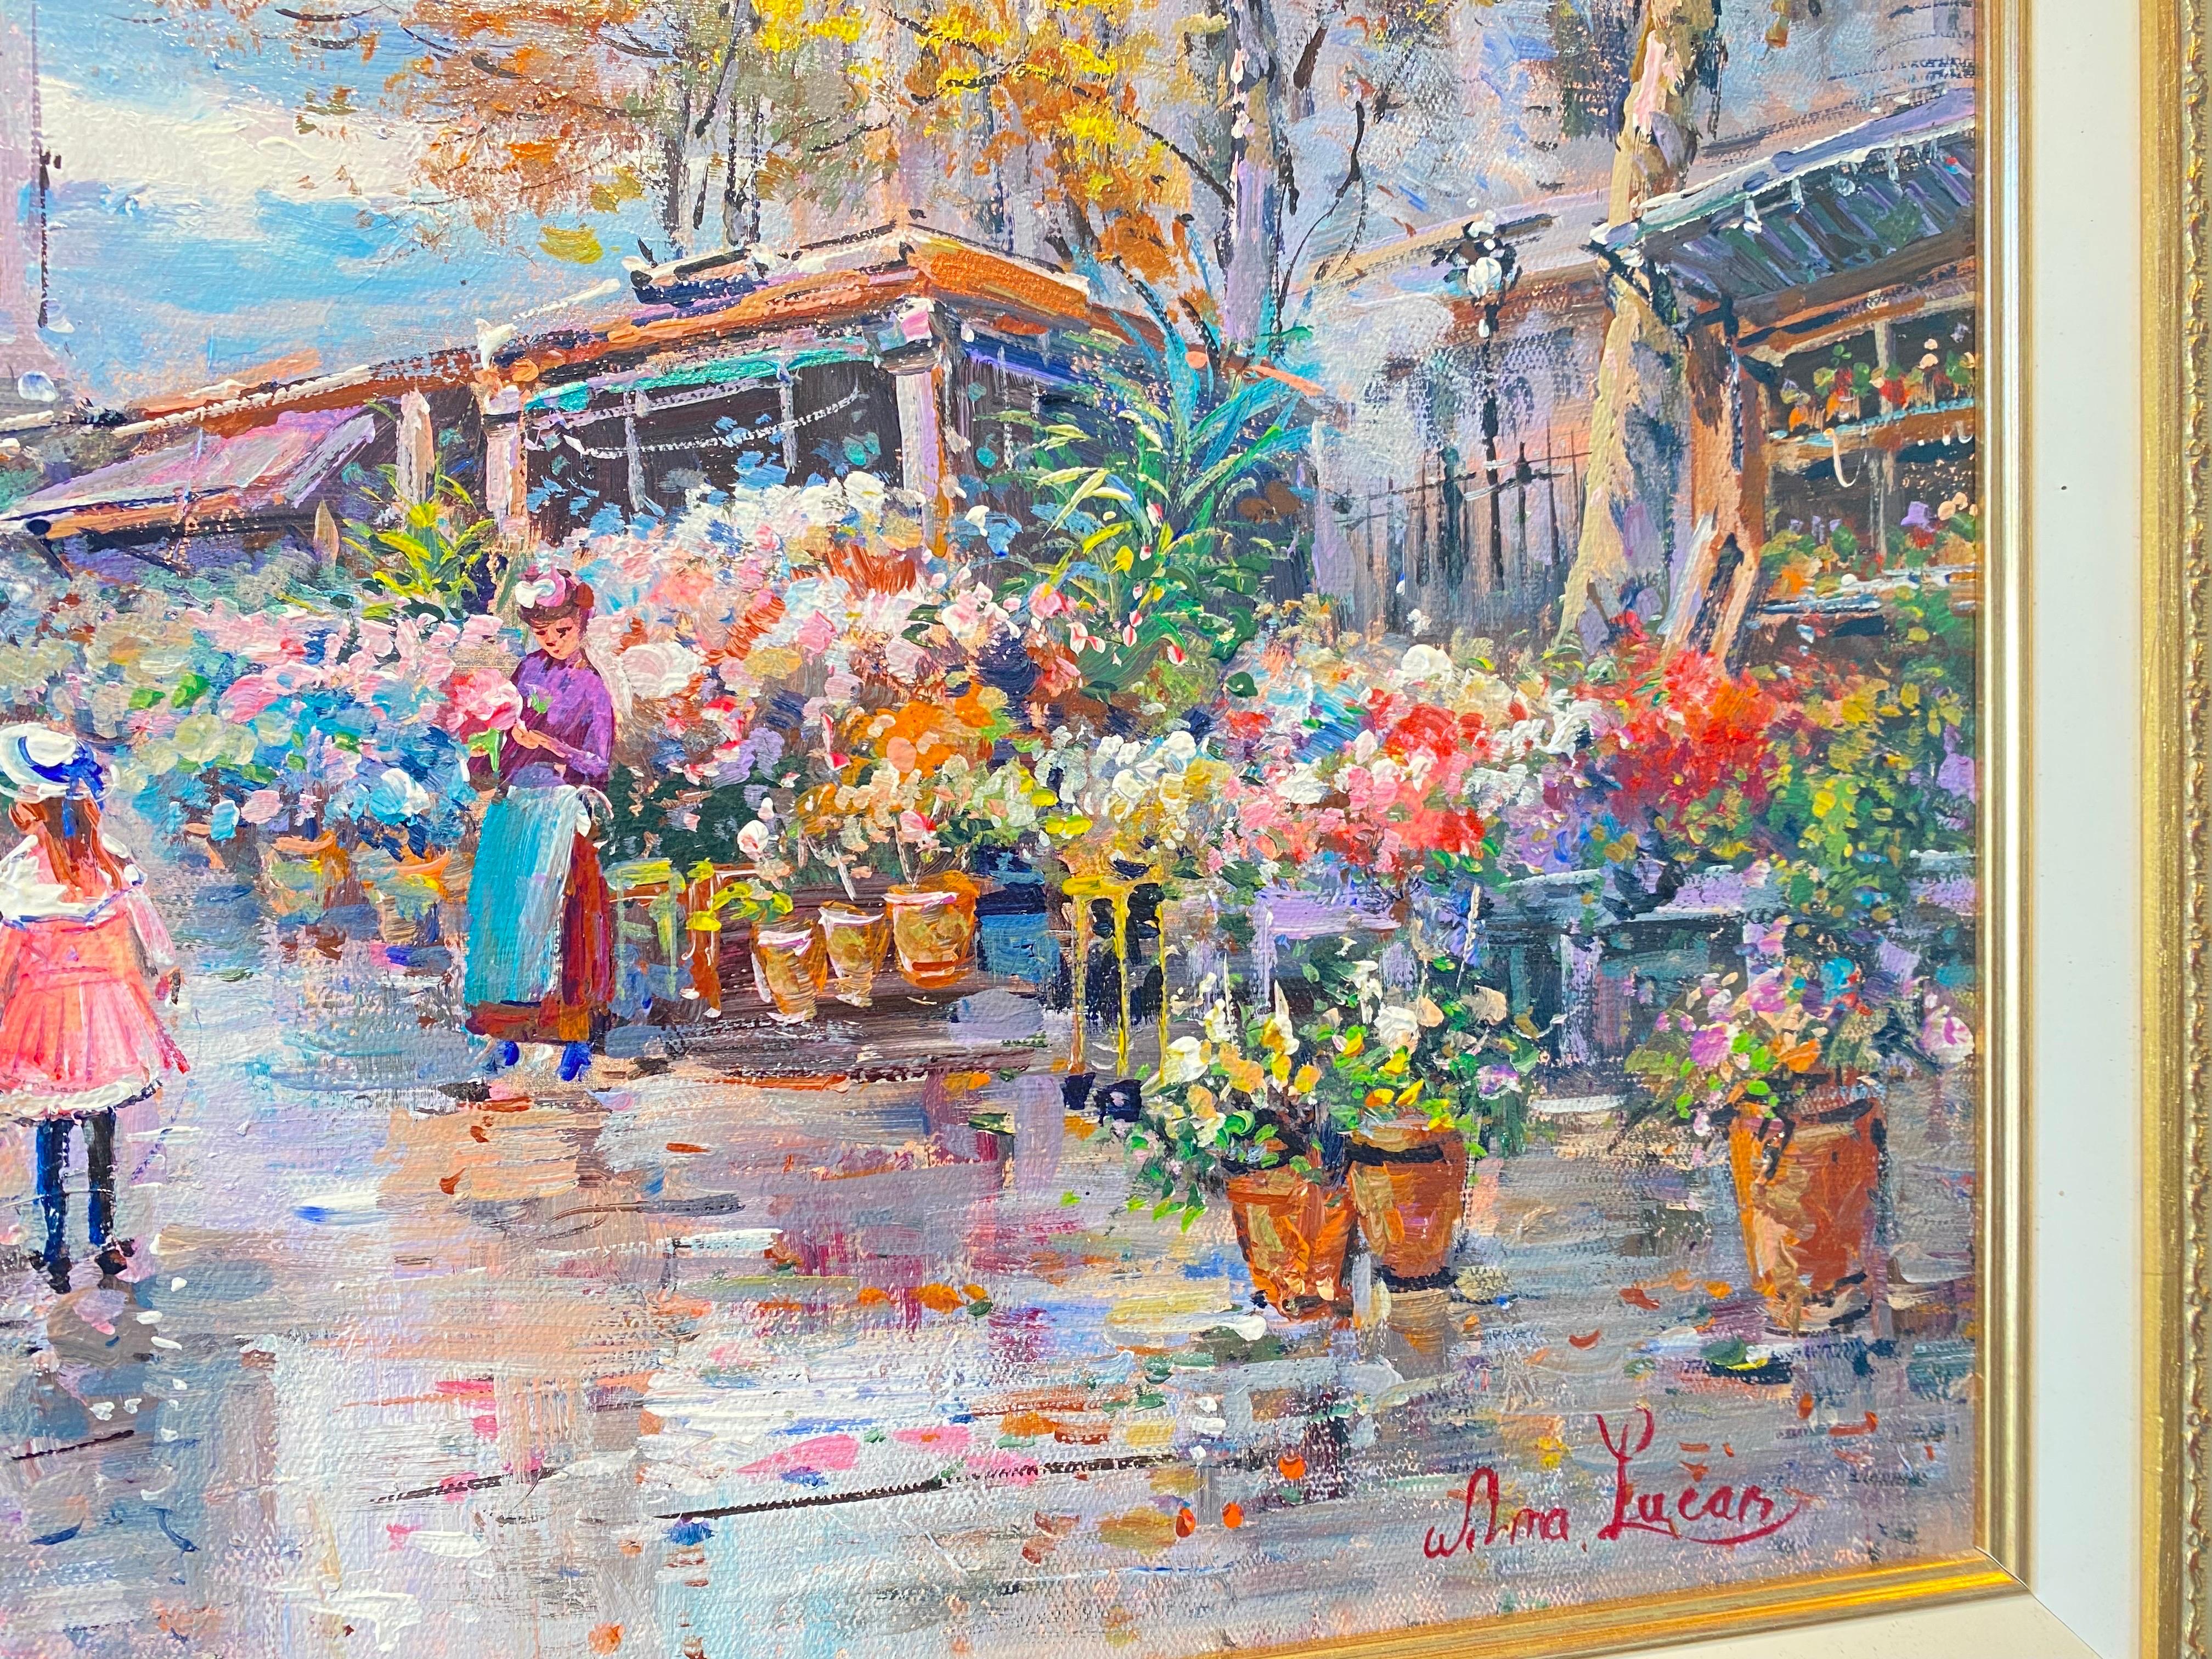 Magnificent French impressionist painting depicting the hustle and bustle of the flower market on the marché Madeleine in Paris, in the style of the late 19th century. Wilma Lucas had a fondness for Paris of the Belle Epoque and was very inspired by